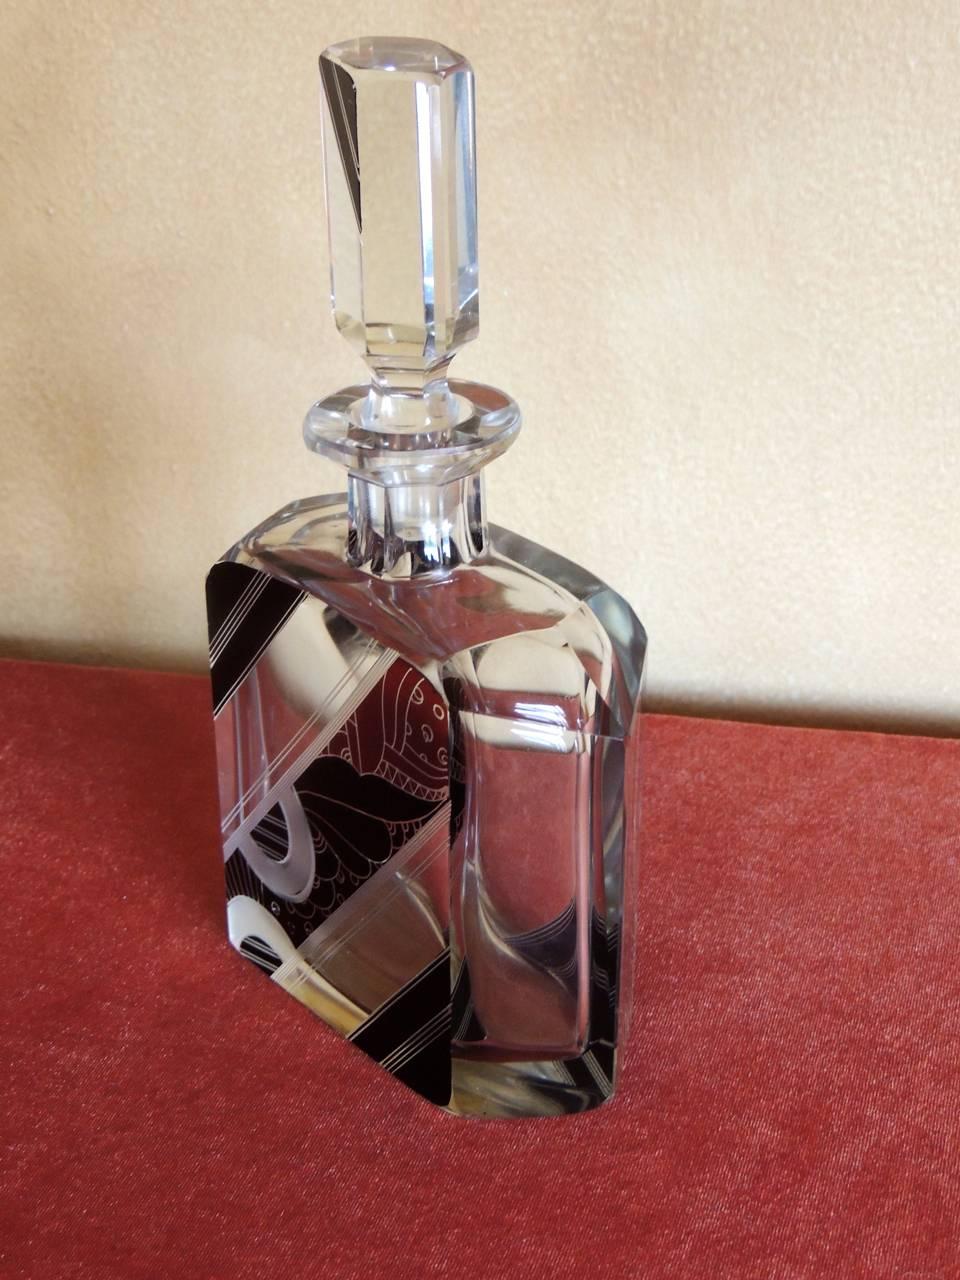 This marvelous decanter can be attributed to Karl Palda, a designer of Czech crystal pieces with a distinct style that was modernist, jazzy and ahead of its time! Heavy, leaded crystal, beautifully cut and bearing an almost quirky asymmetrical